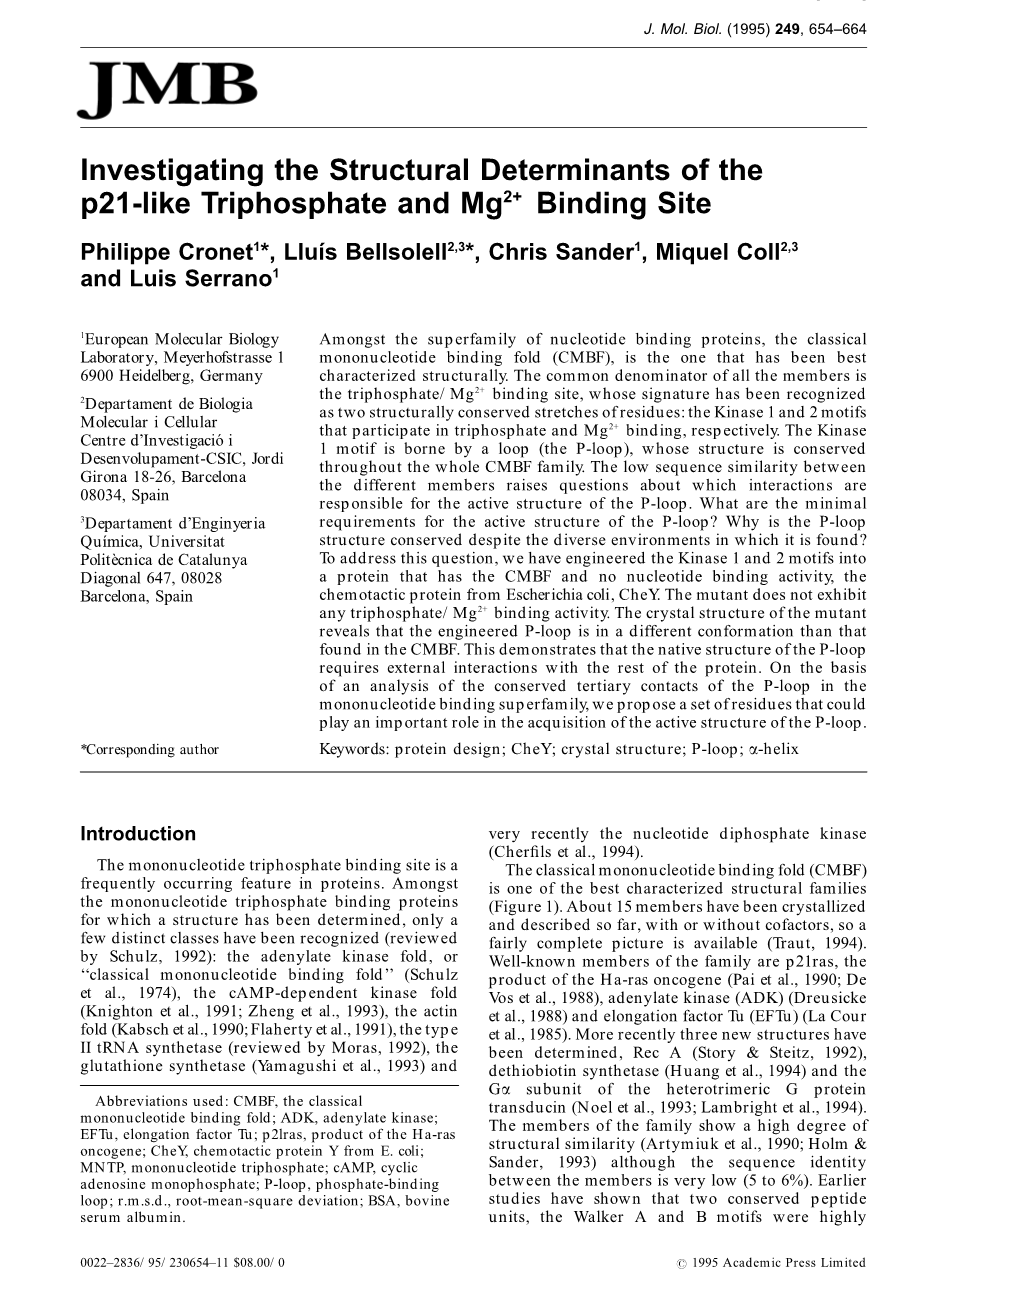 Investigating the Structural Determinants of the P21-Like